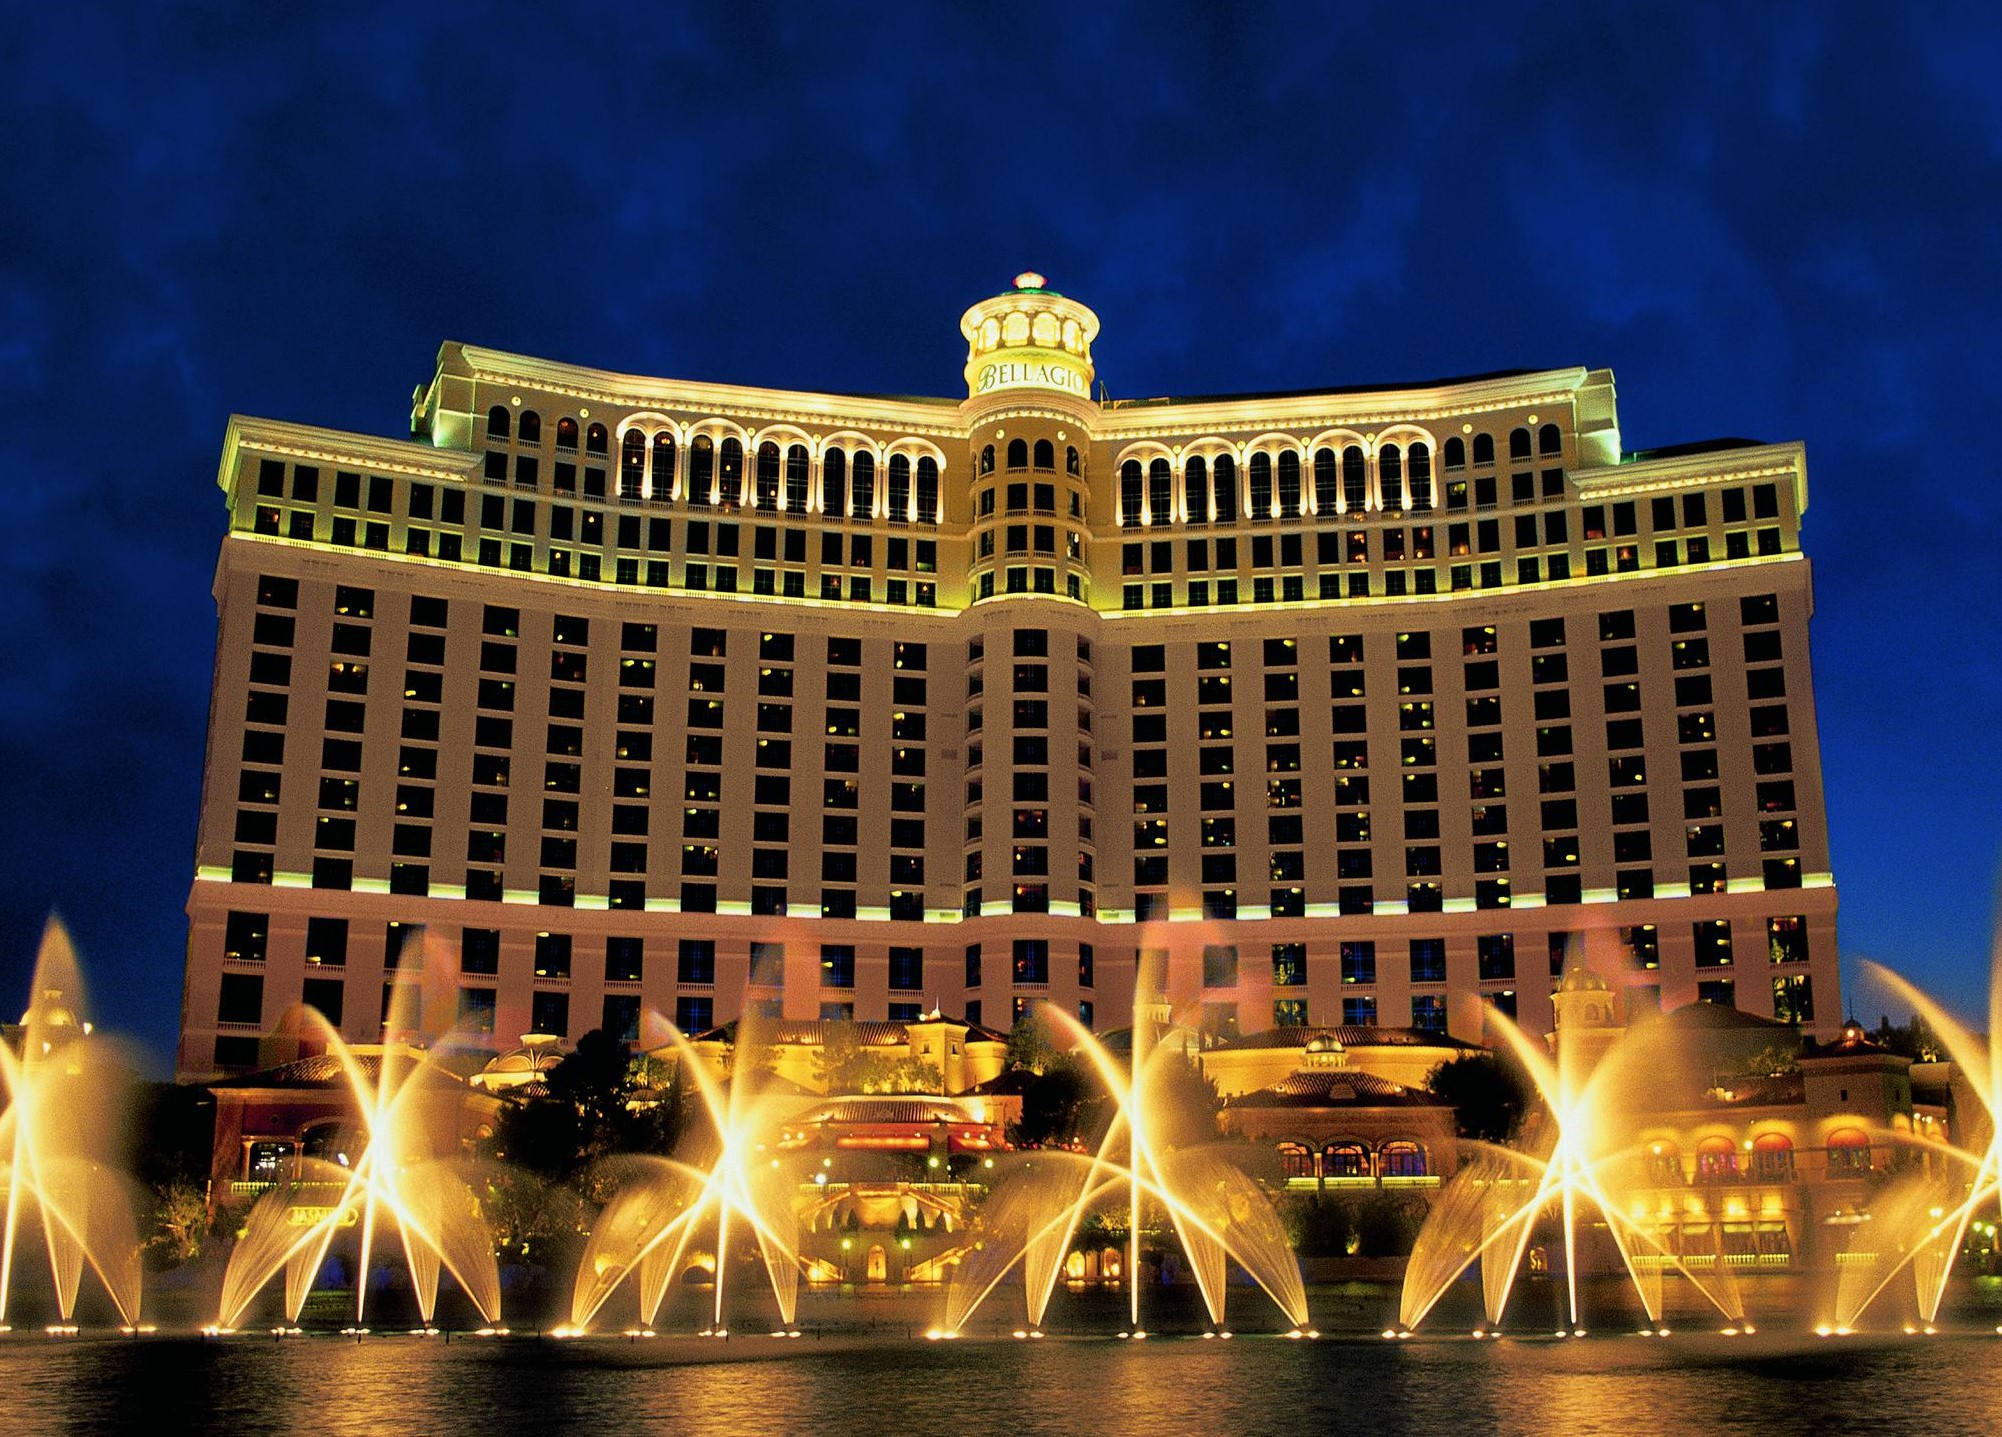 Things to See/Do in Bellagio (Las Vegas) - EazyNazy